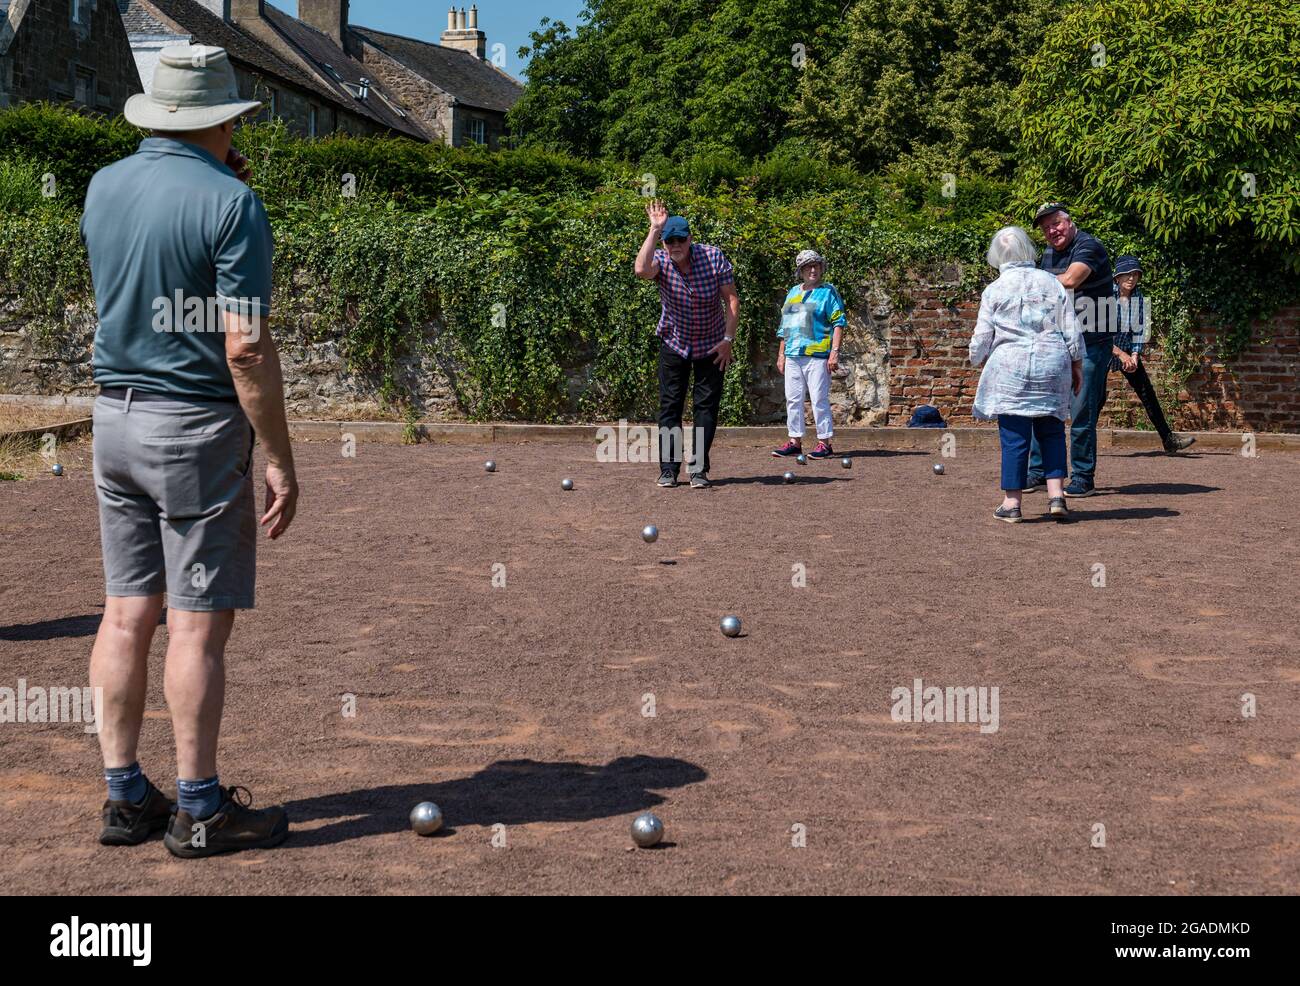 Senior citizens, older people or pensioners playing petanque or boules in Summer sunshine, Haddington, East Lothian, Scotland, UK Stock Photo